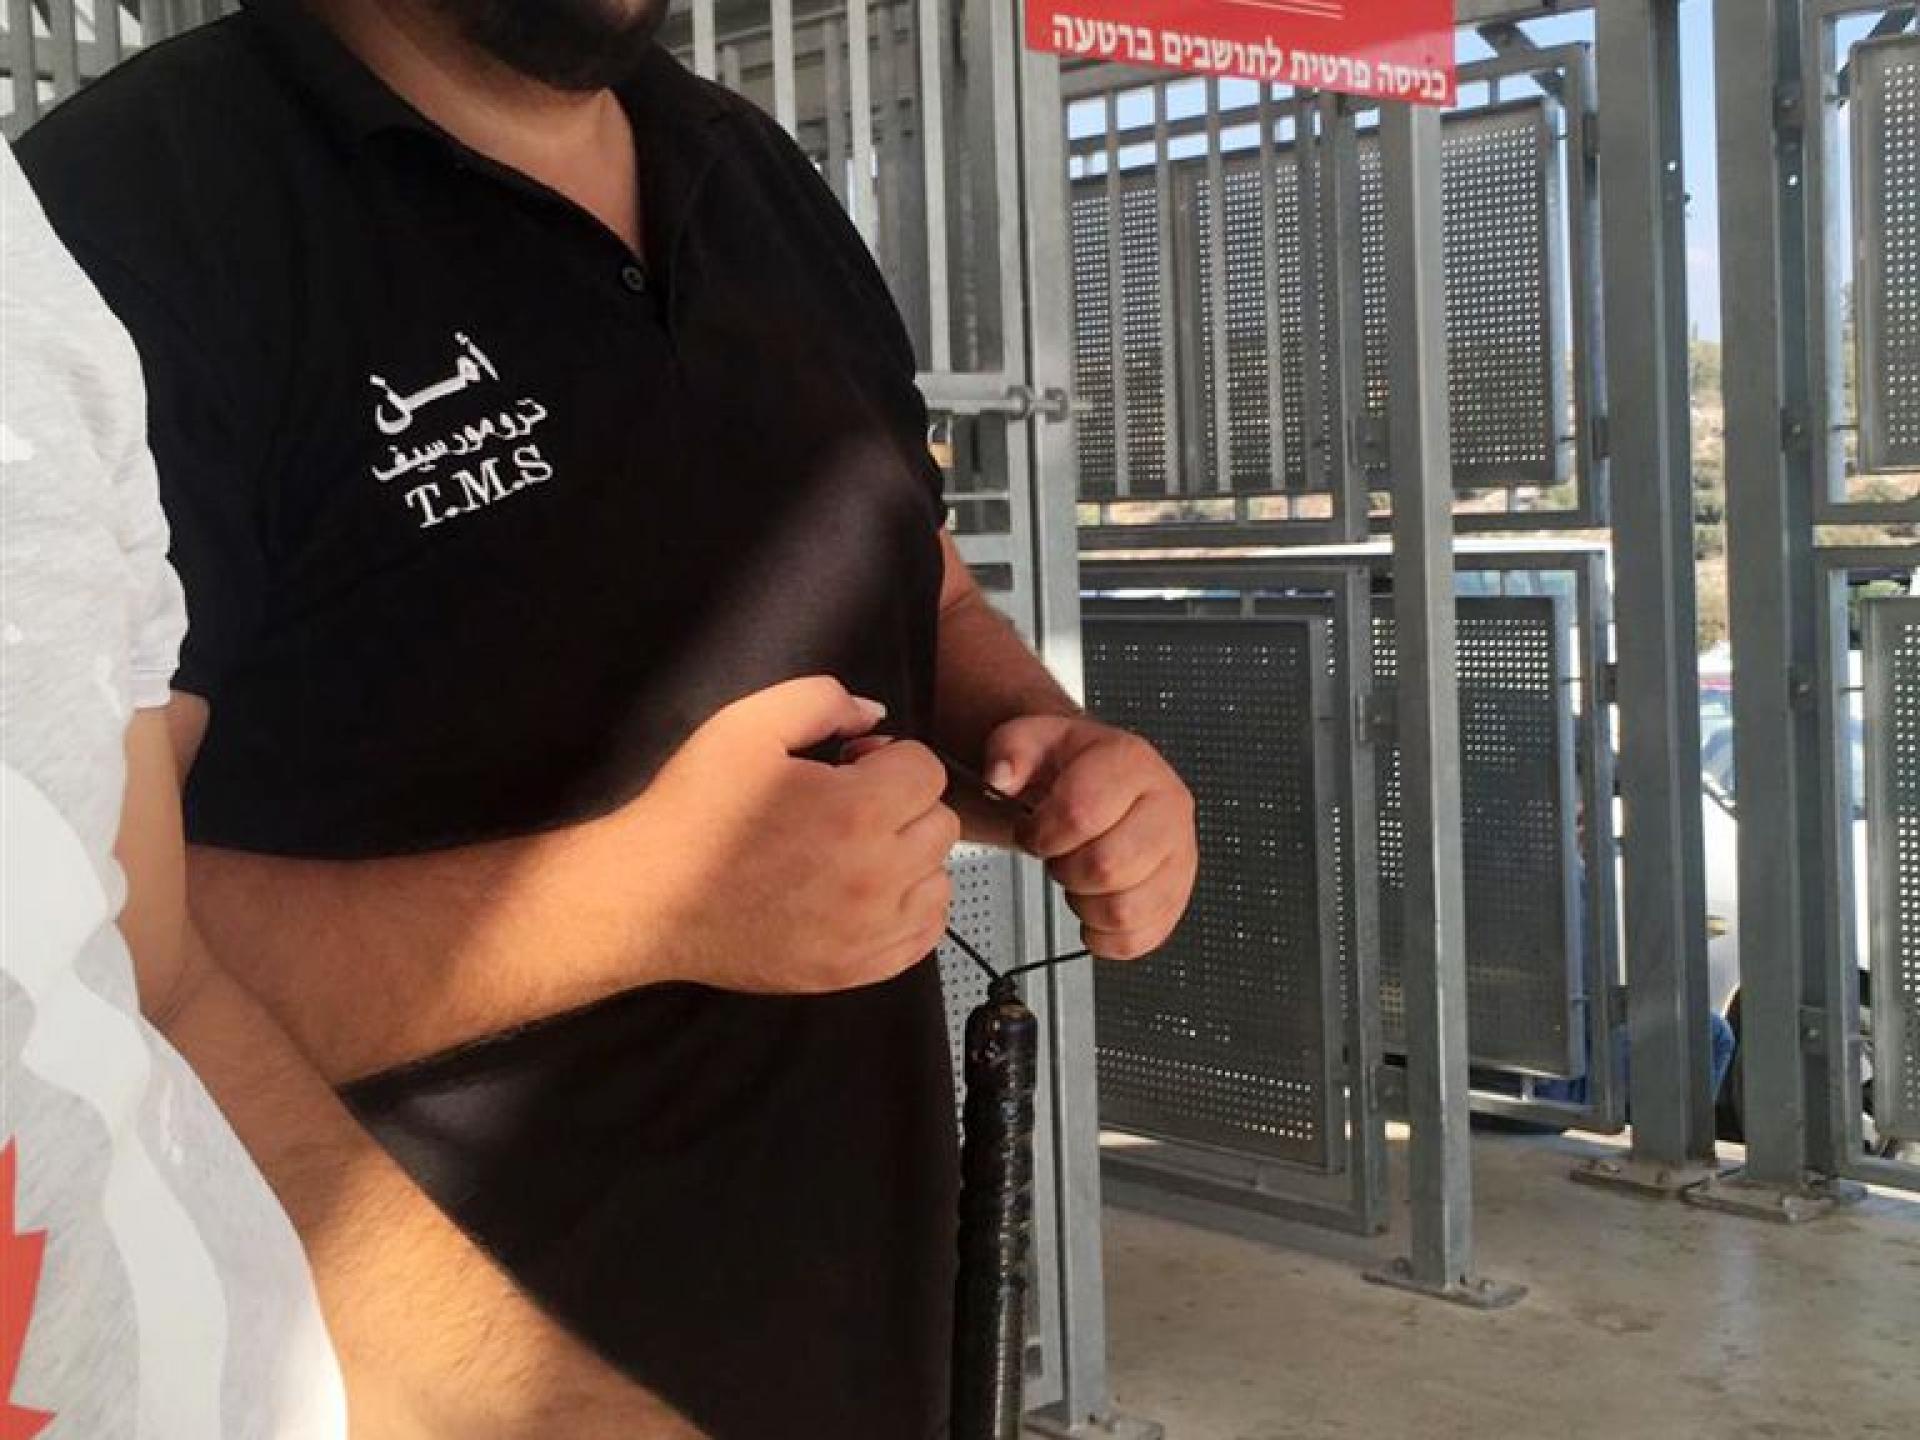 The Barta'a checkpoint: Palestinian security guard armed with club